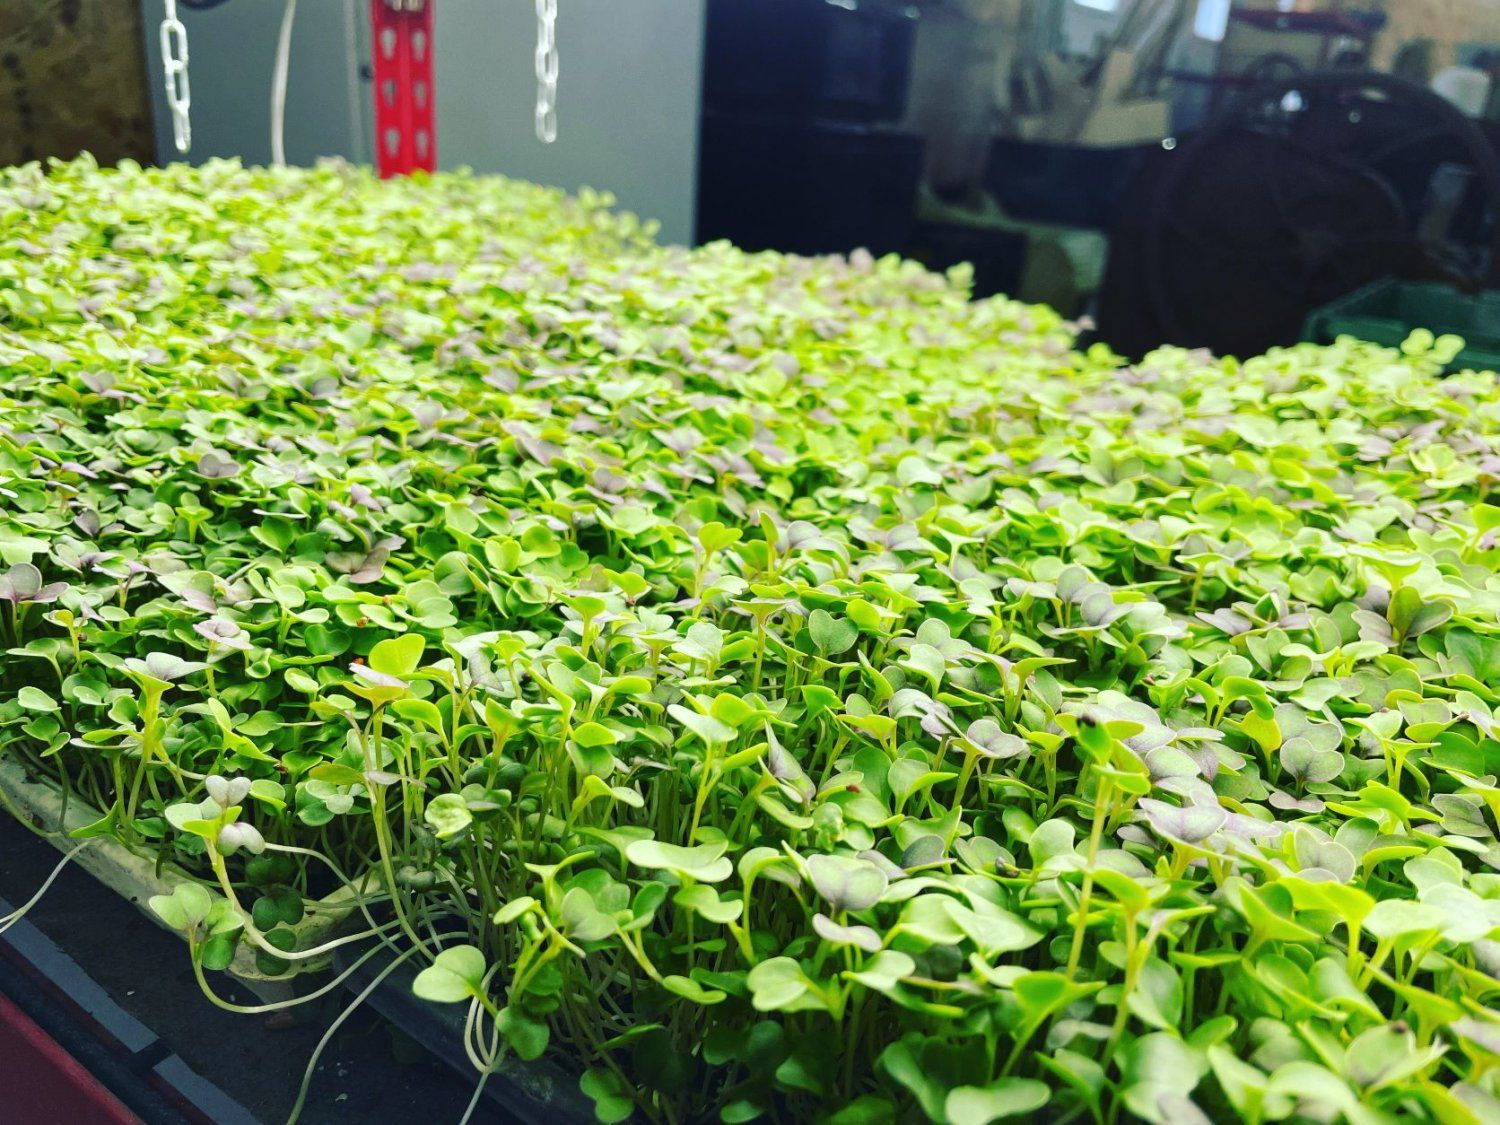 Previous Happening: Trialing Microgreens!